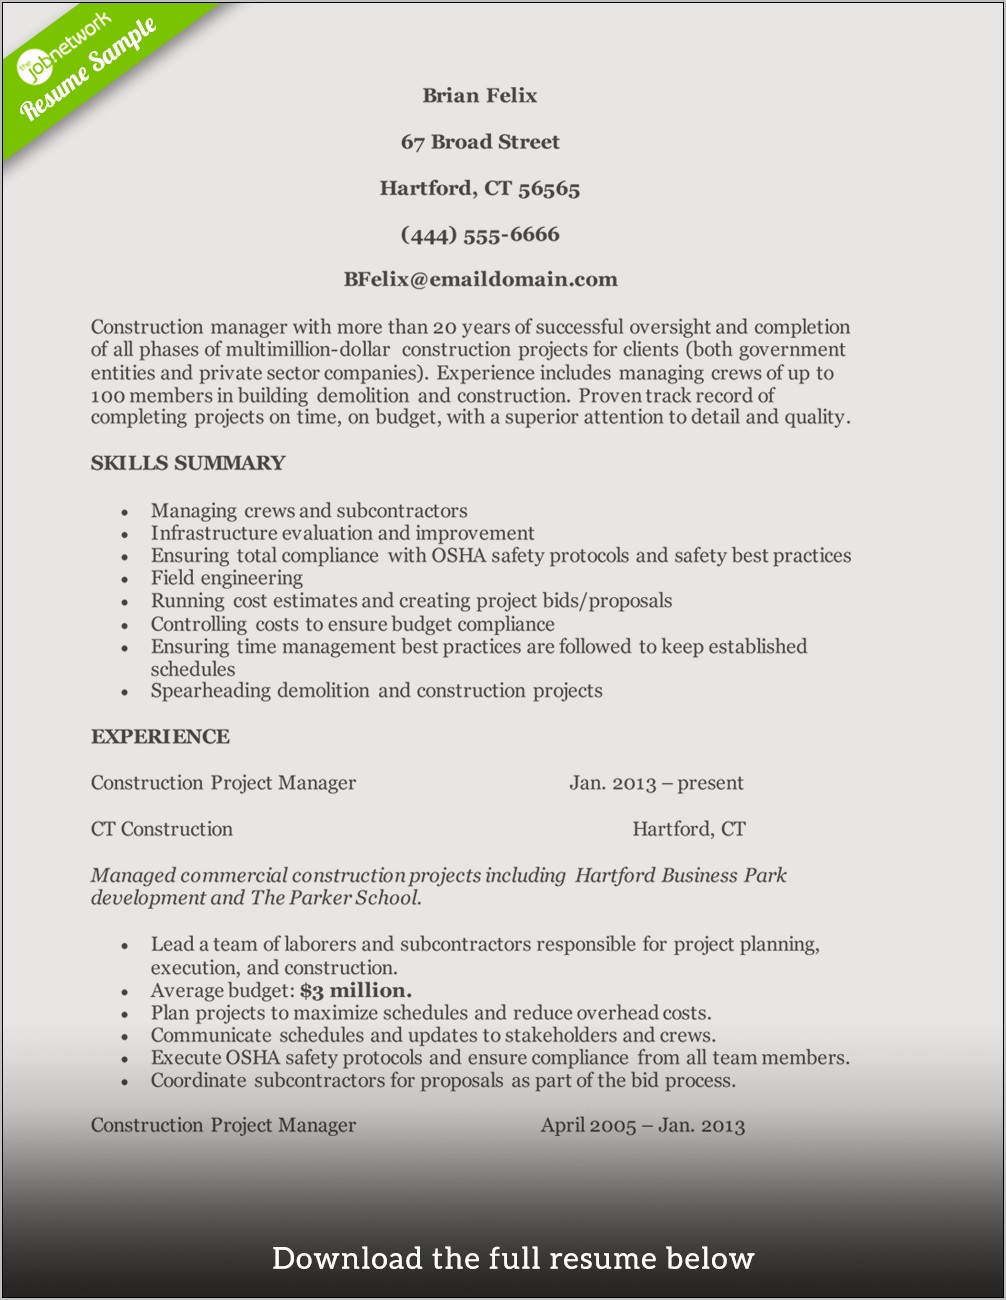 Resume Examples For Construction In Jails